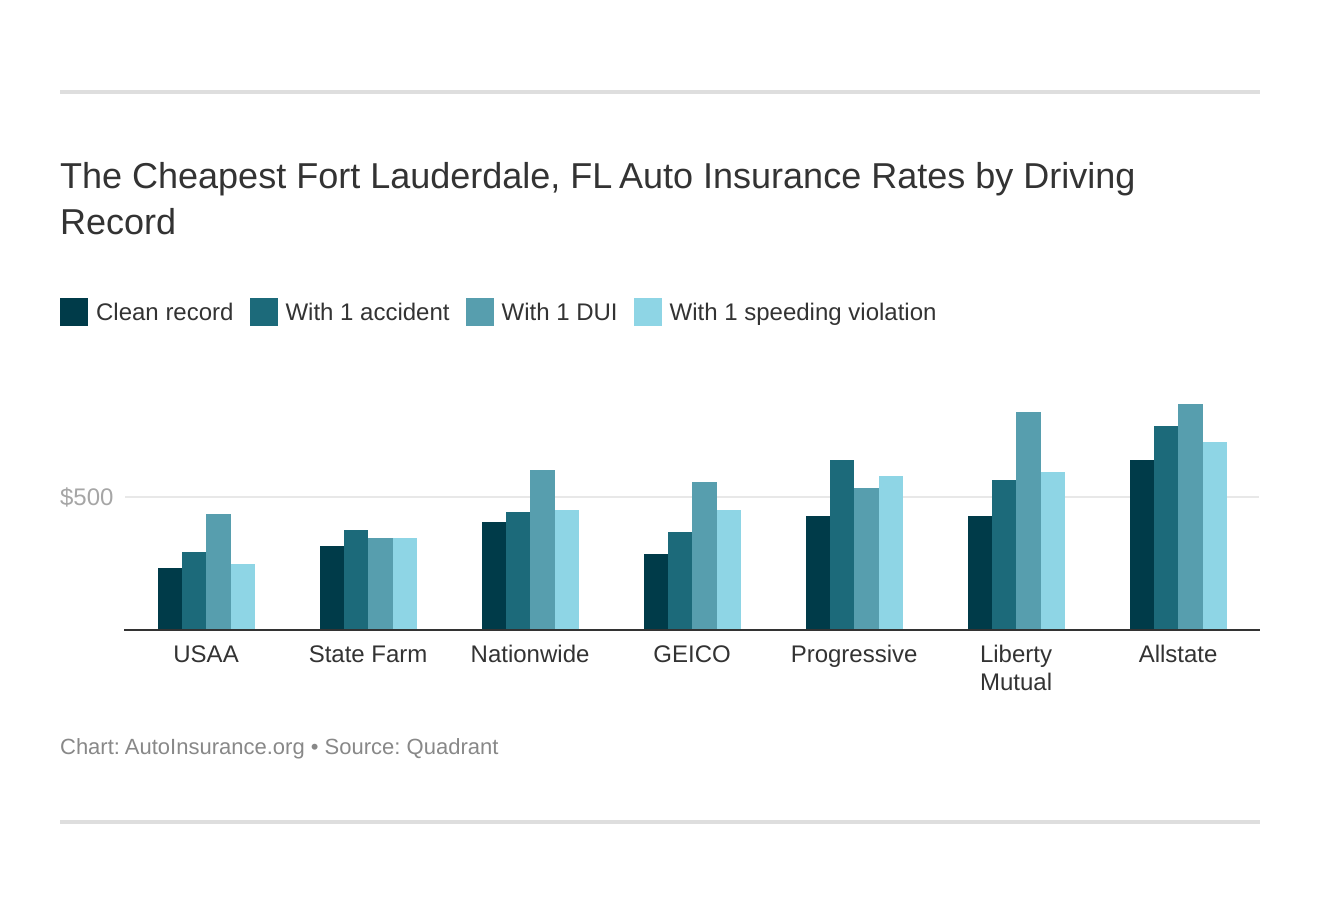 The Cheapest Fort Lauderdale, FL Auto Insurance Rates by Driving Record